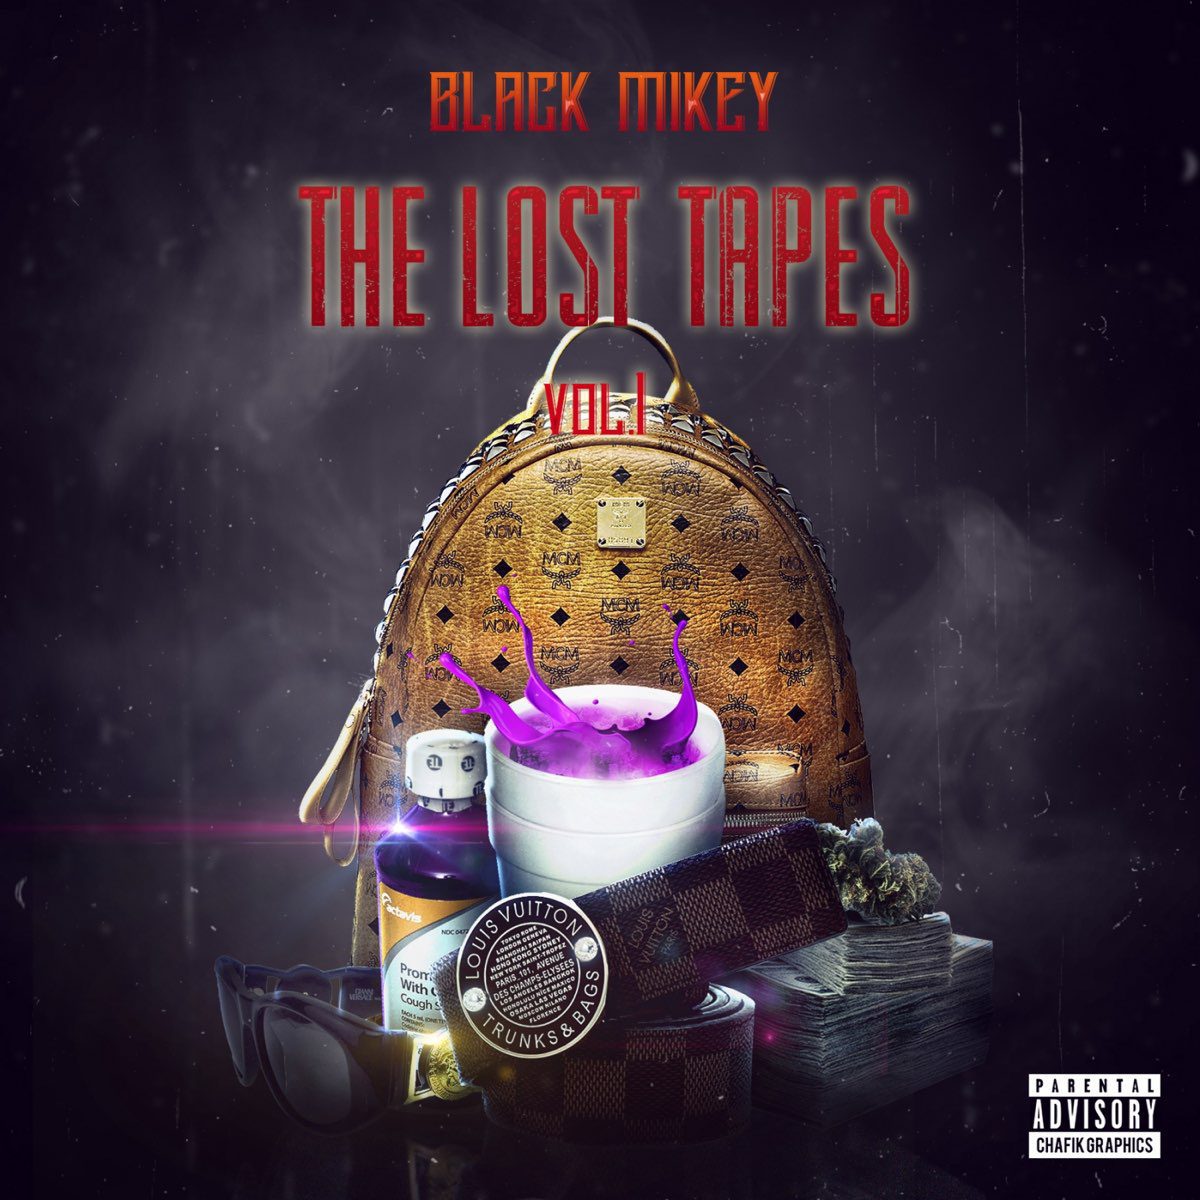 Black Mikey - The Lost Tapes